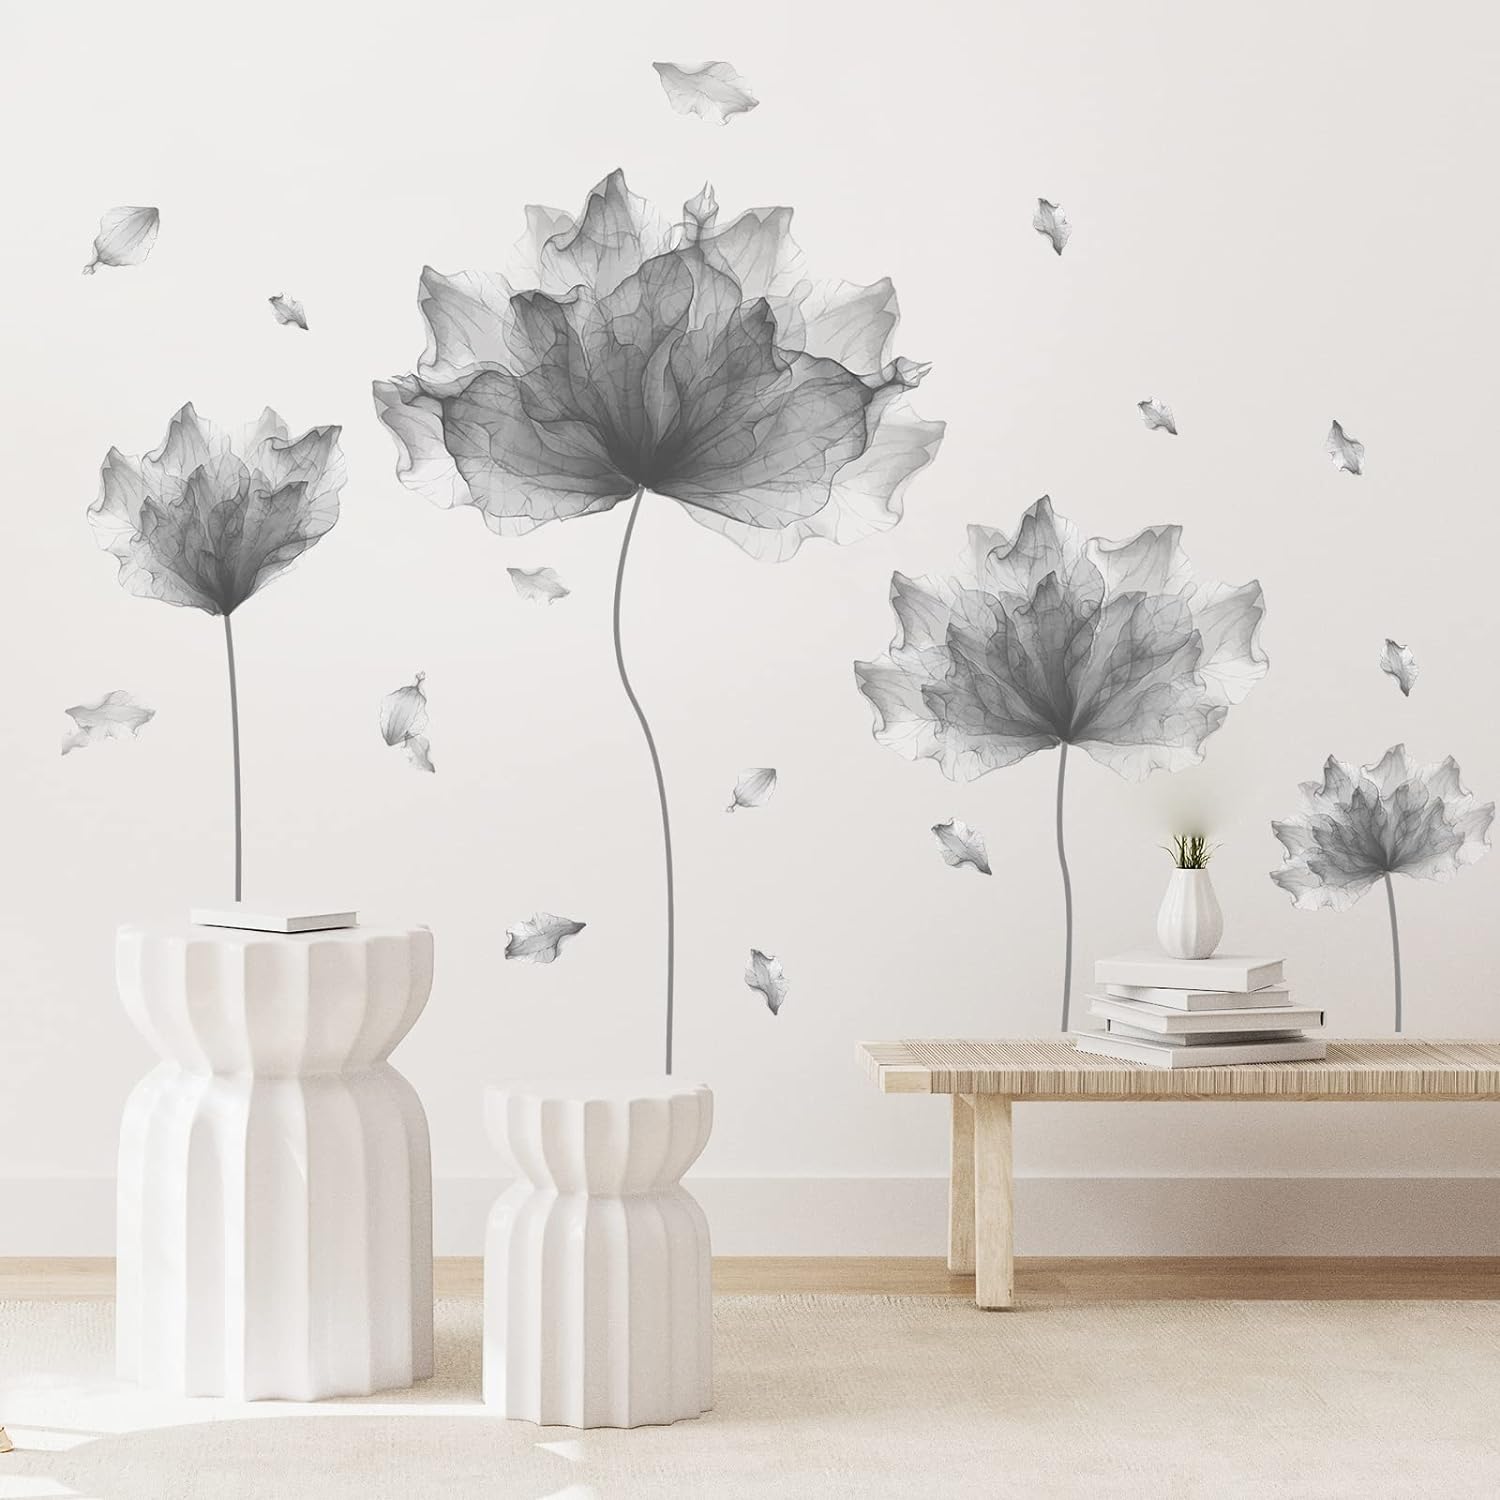 RoyoLam 39.3'' x 32.6'' Huge Flower Petal Wall Decals Living Room Floral Wall Stickers Removable Peel and Stick Waterproof Wall Art Decor Stickers for Bedroom Bathroom Office (Gray)